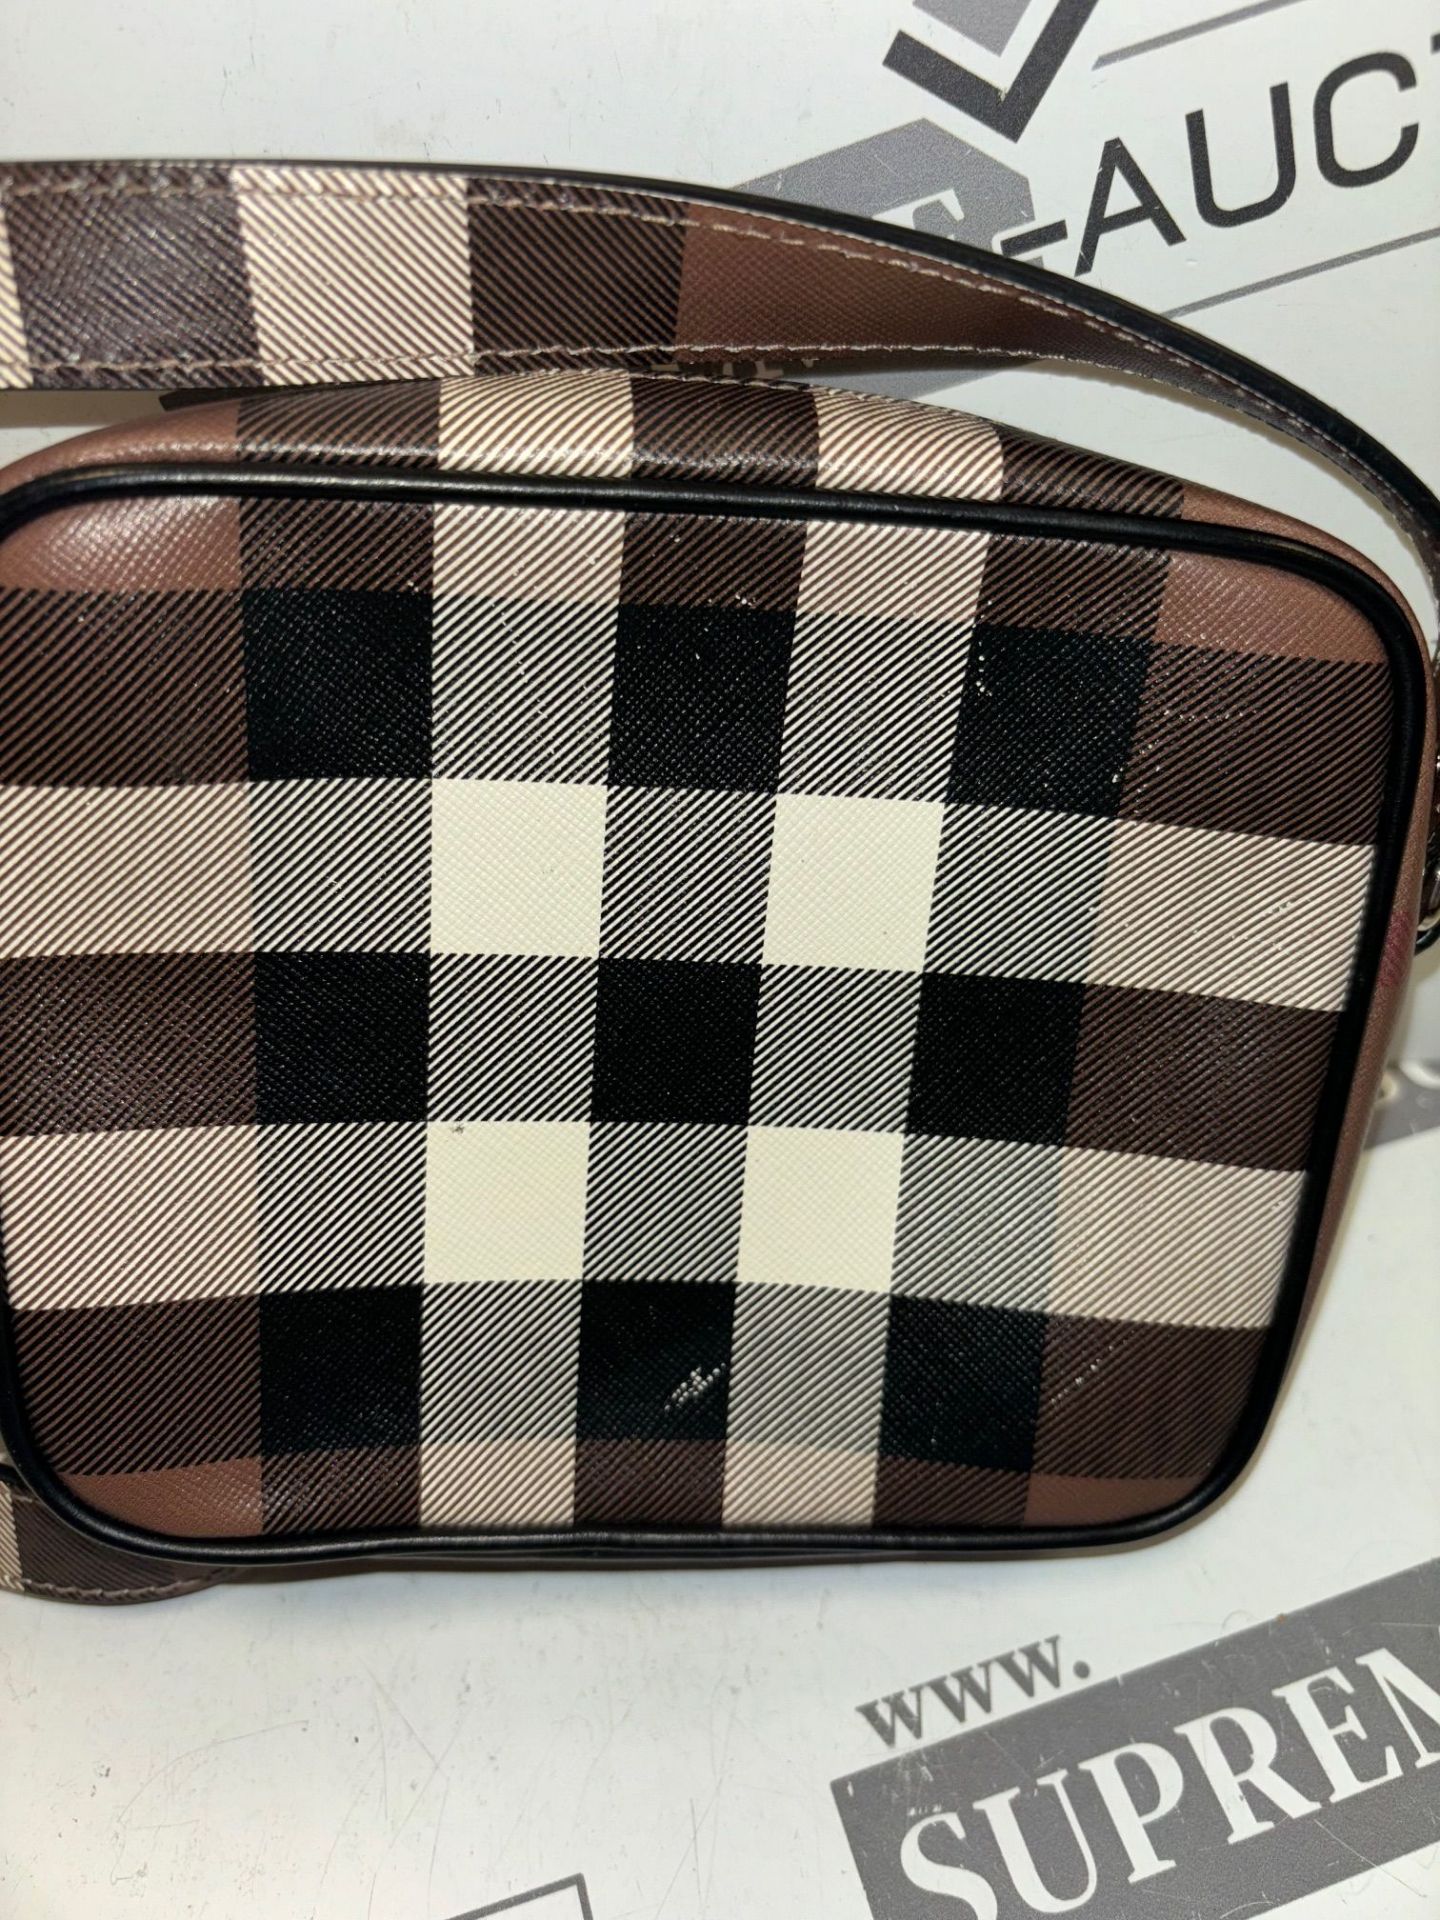 Burberry Shoulder Bag Check Coated Canvas Brown. 16x13cm. (14.21) - Image 7 of 9